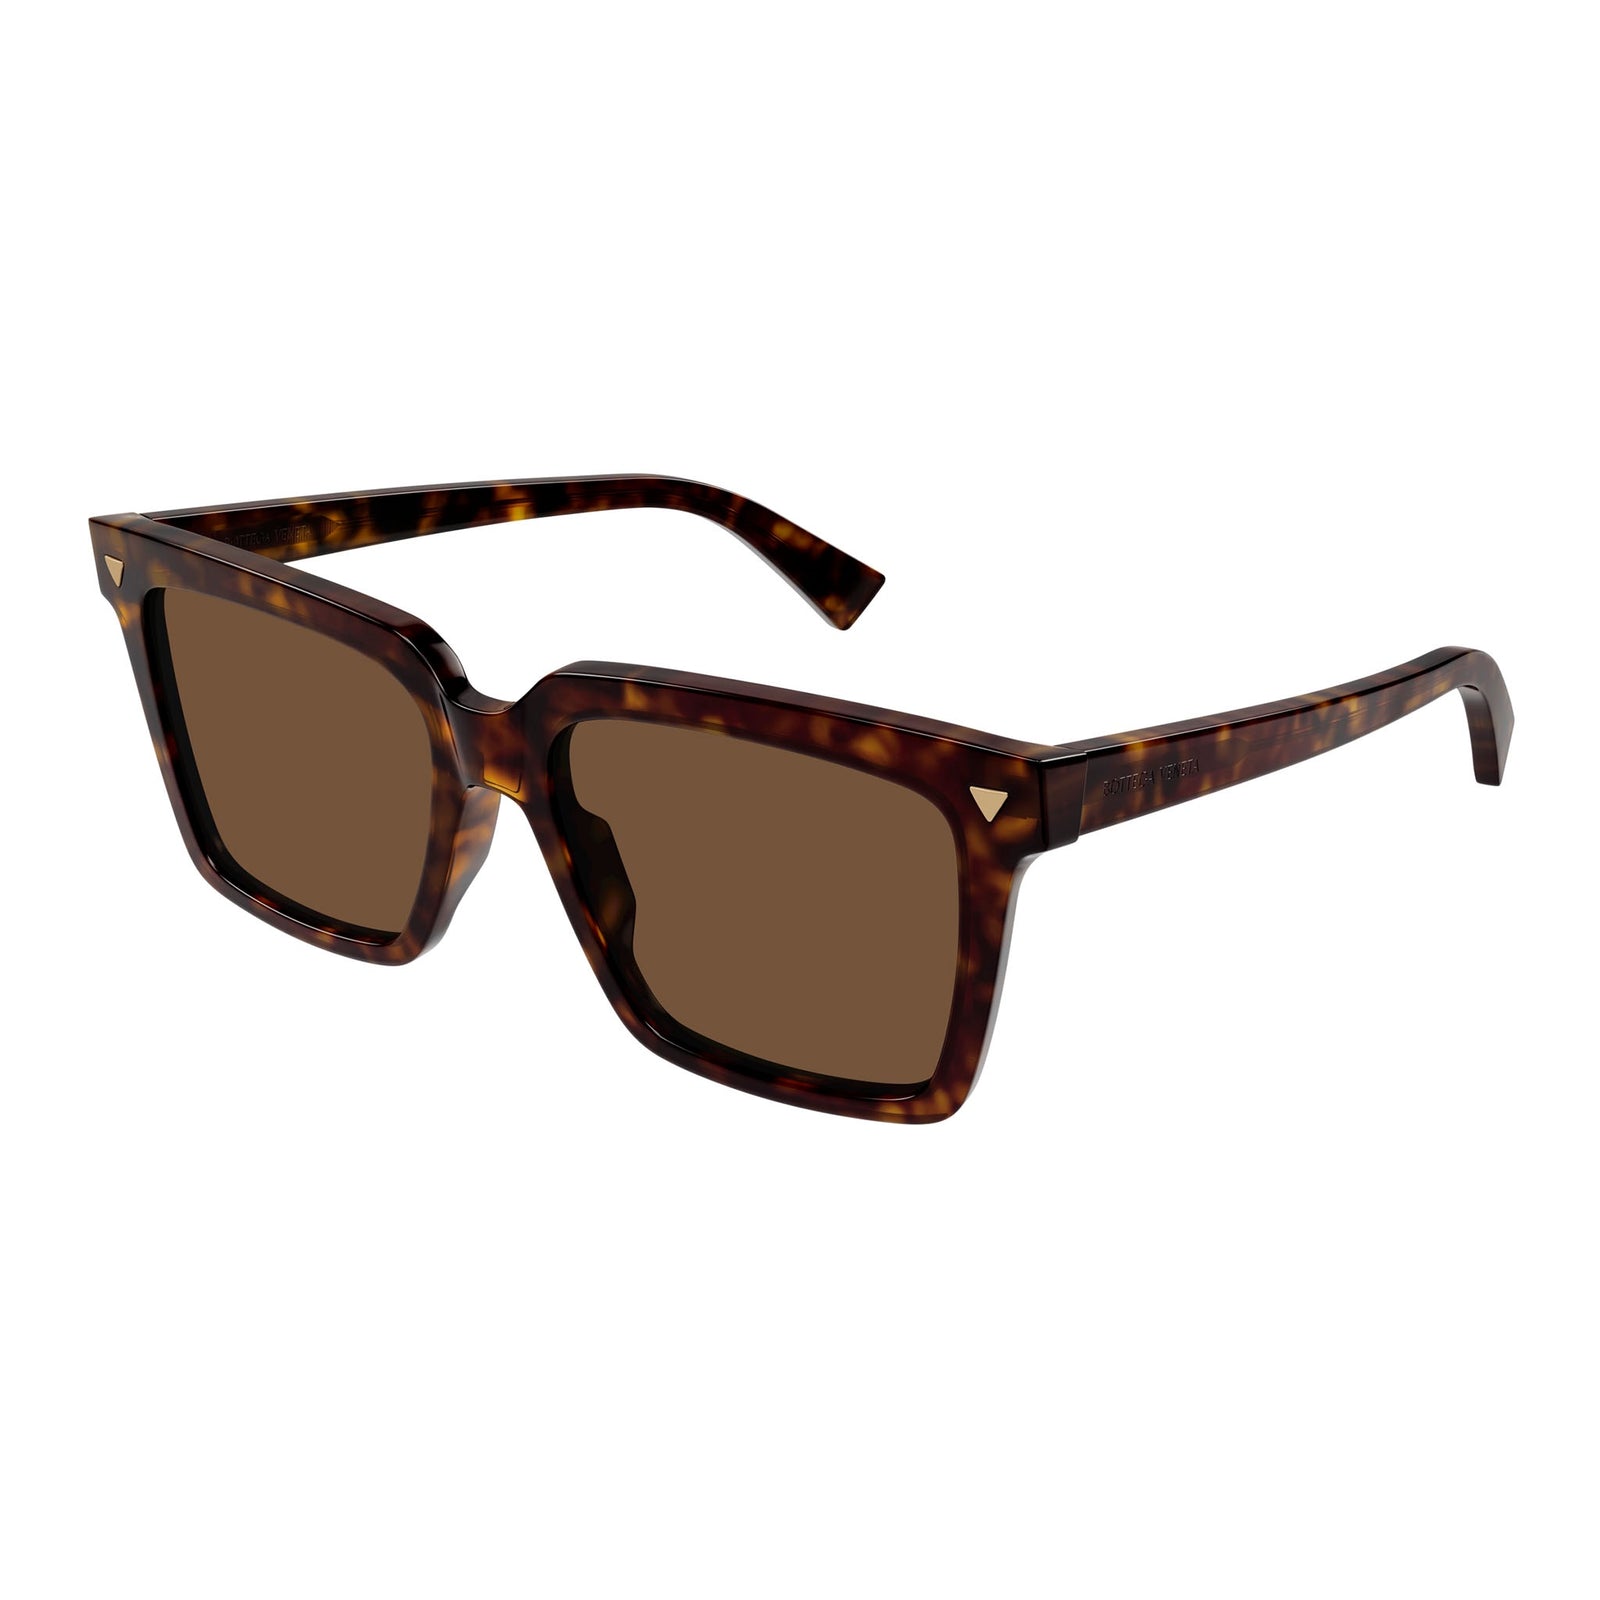 HAWKEYE Sunglasses in Striped Havana and Brown - RB2298 | Ray-Ban® US